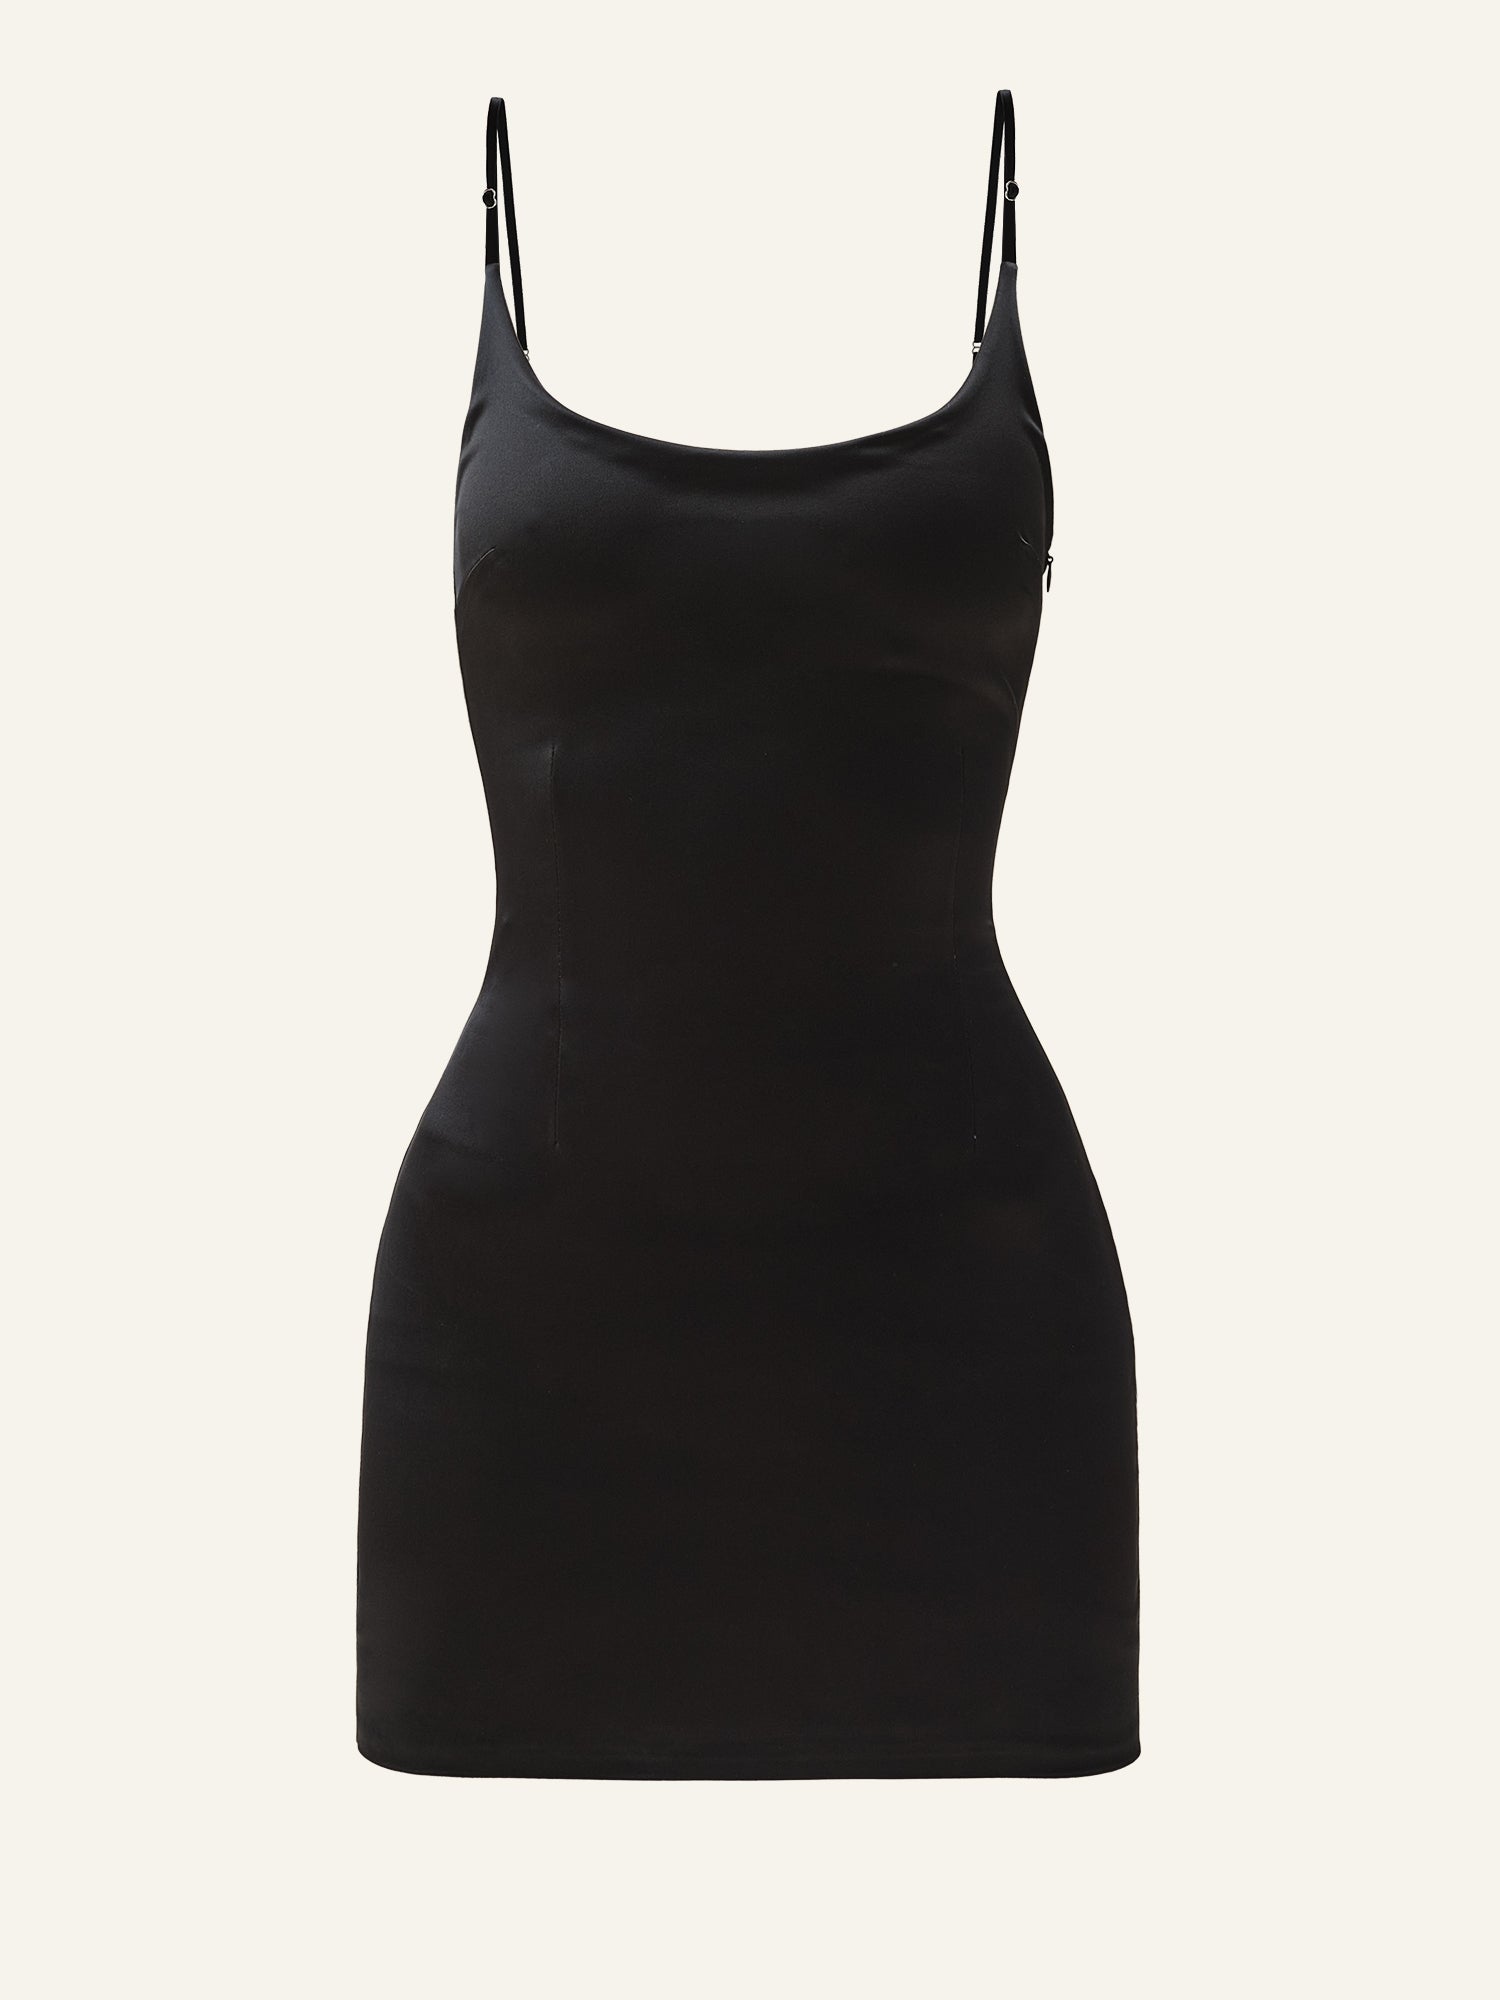 Product photo of a black mini dress, featuring shorts underneath